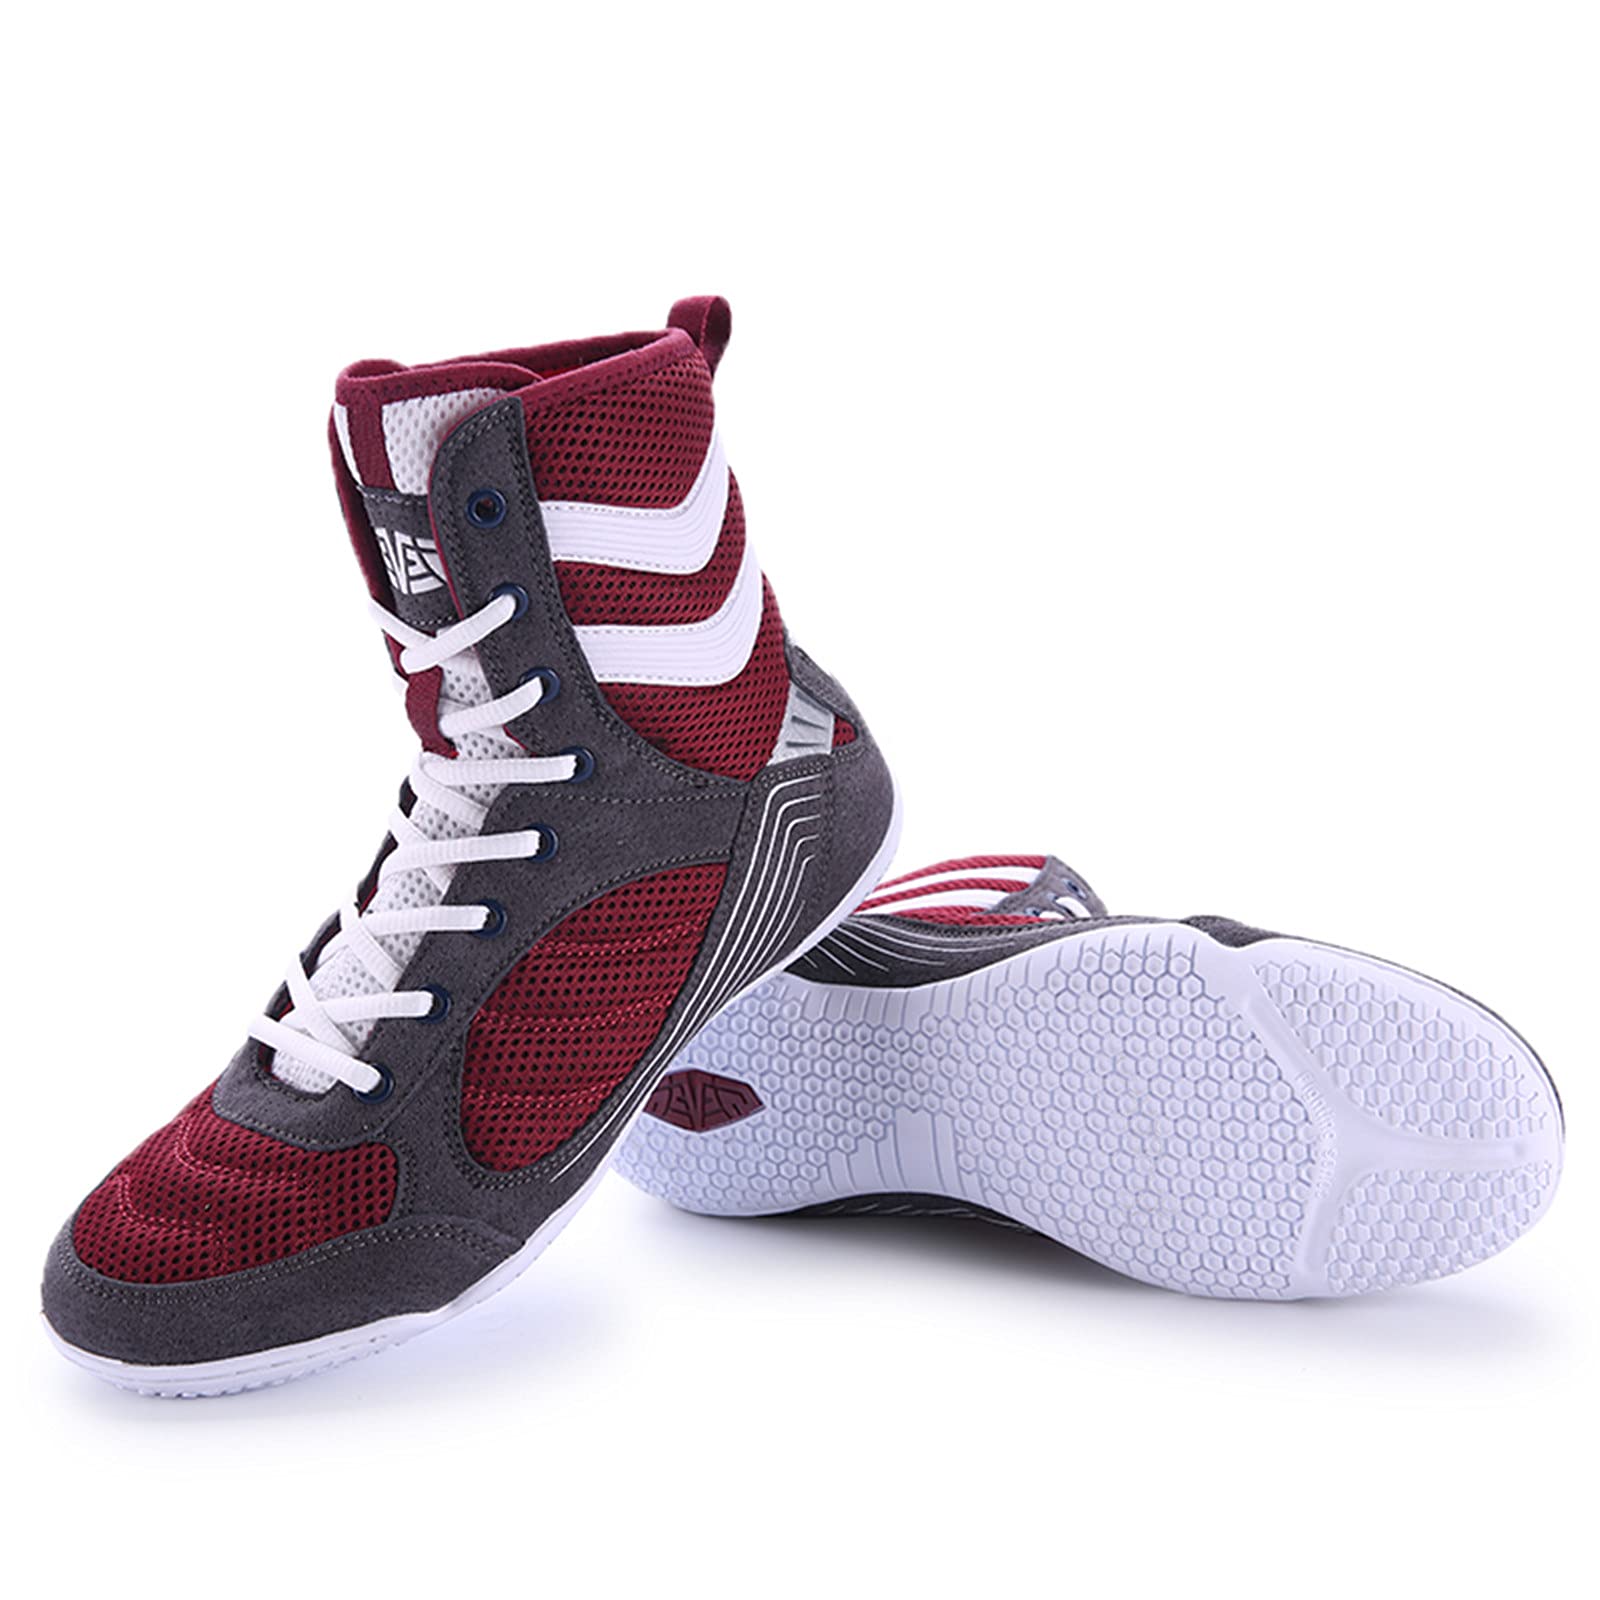 Wholesale 2022 boxing shoes for men good quality and best price men boxing  shoes professional boxing shoes From m.alibaba.com